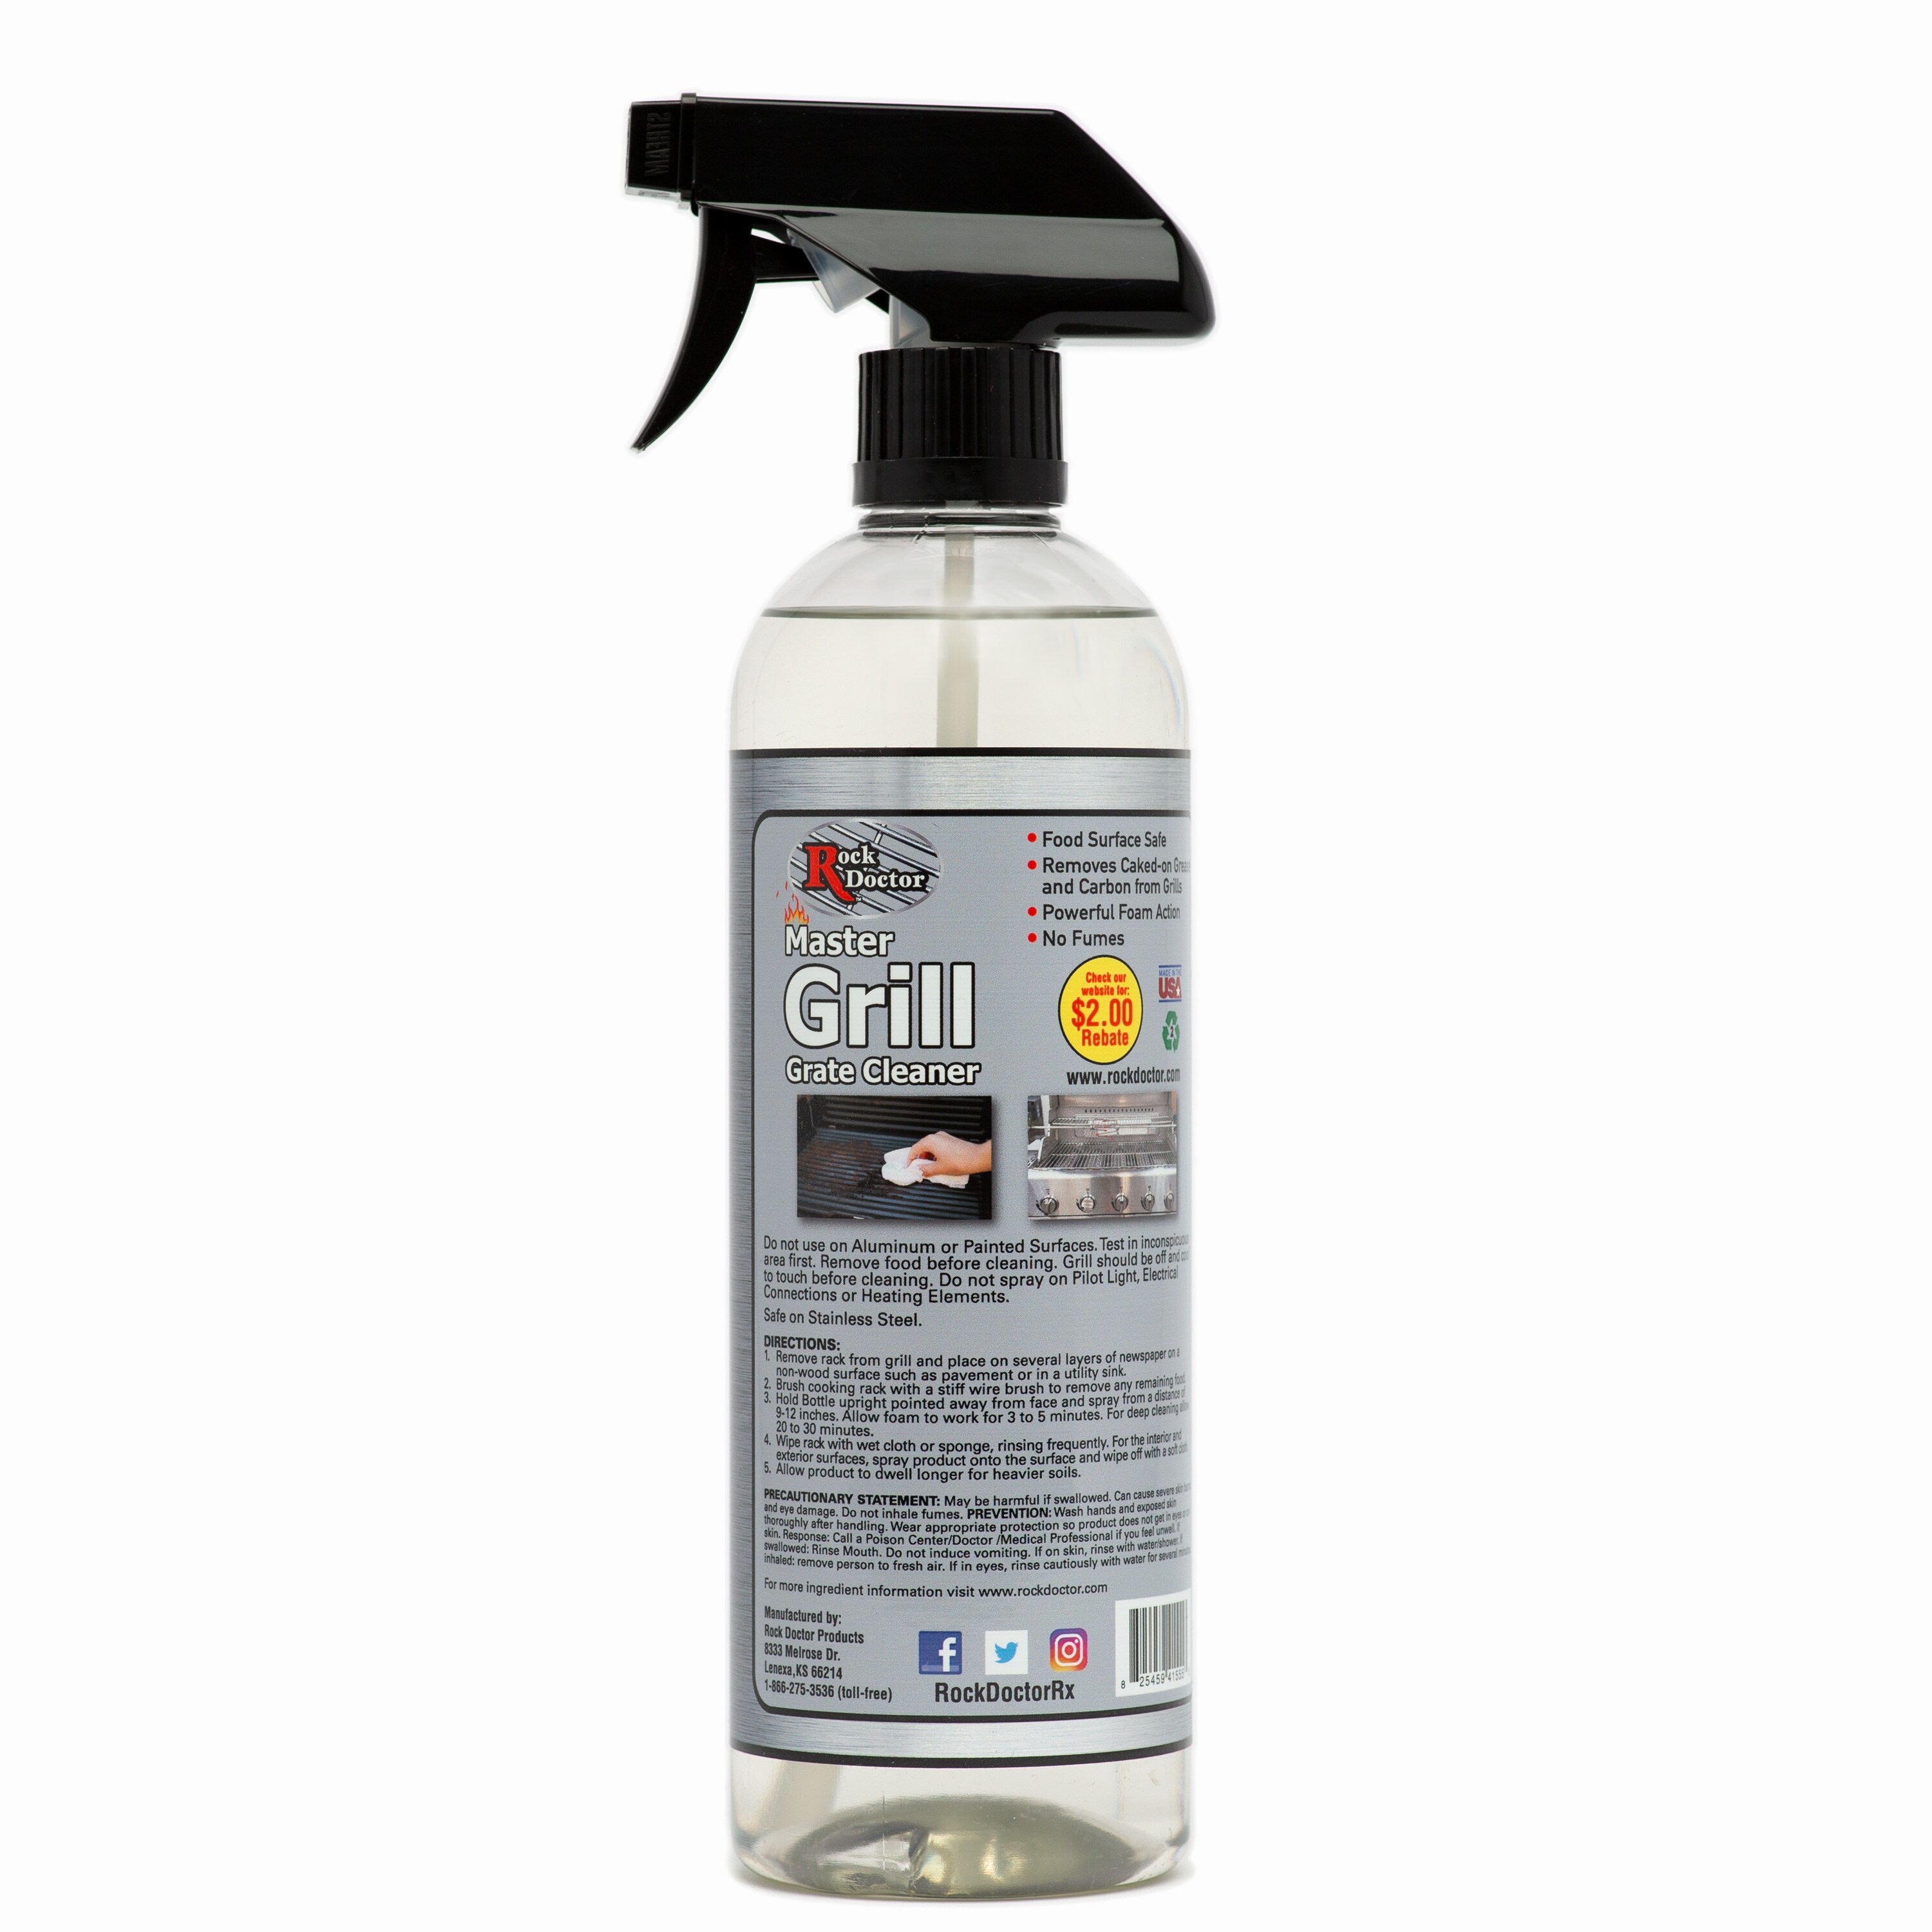 Cuisinart 25 pk Grill Degreaser Wipes - Clean Grease And Grime